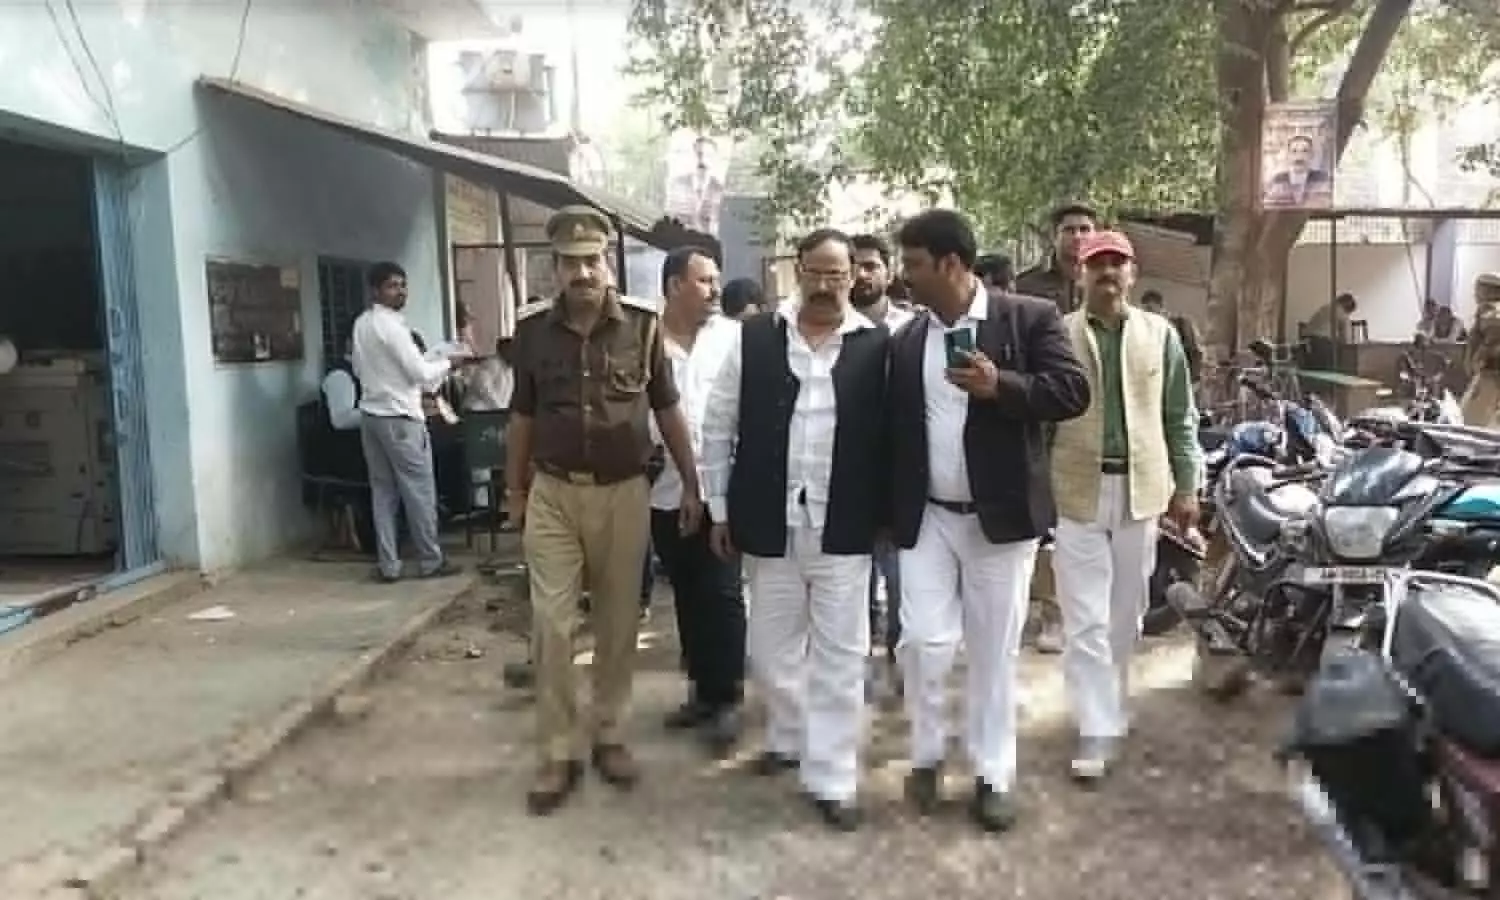 Mirzapur News: Uday Bhan Singh reached the court under tight security, warrant was issued in the old case